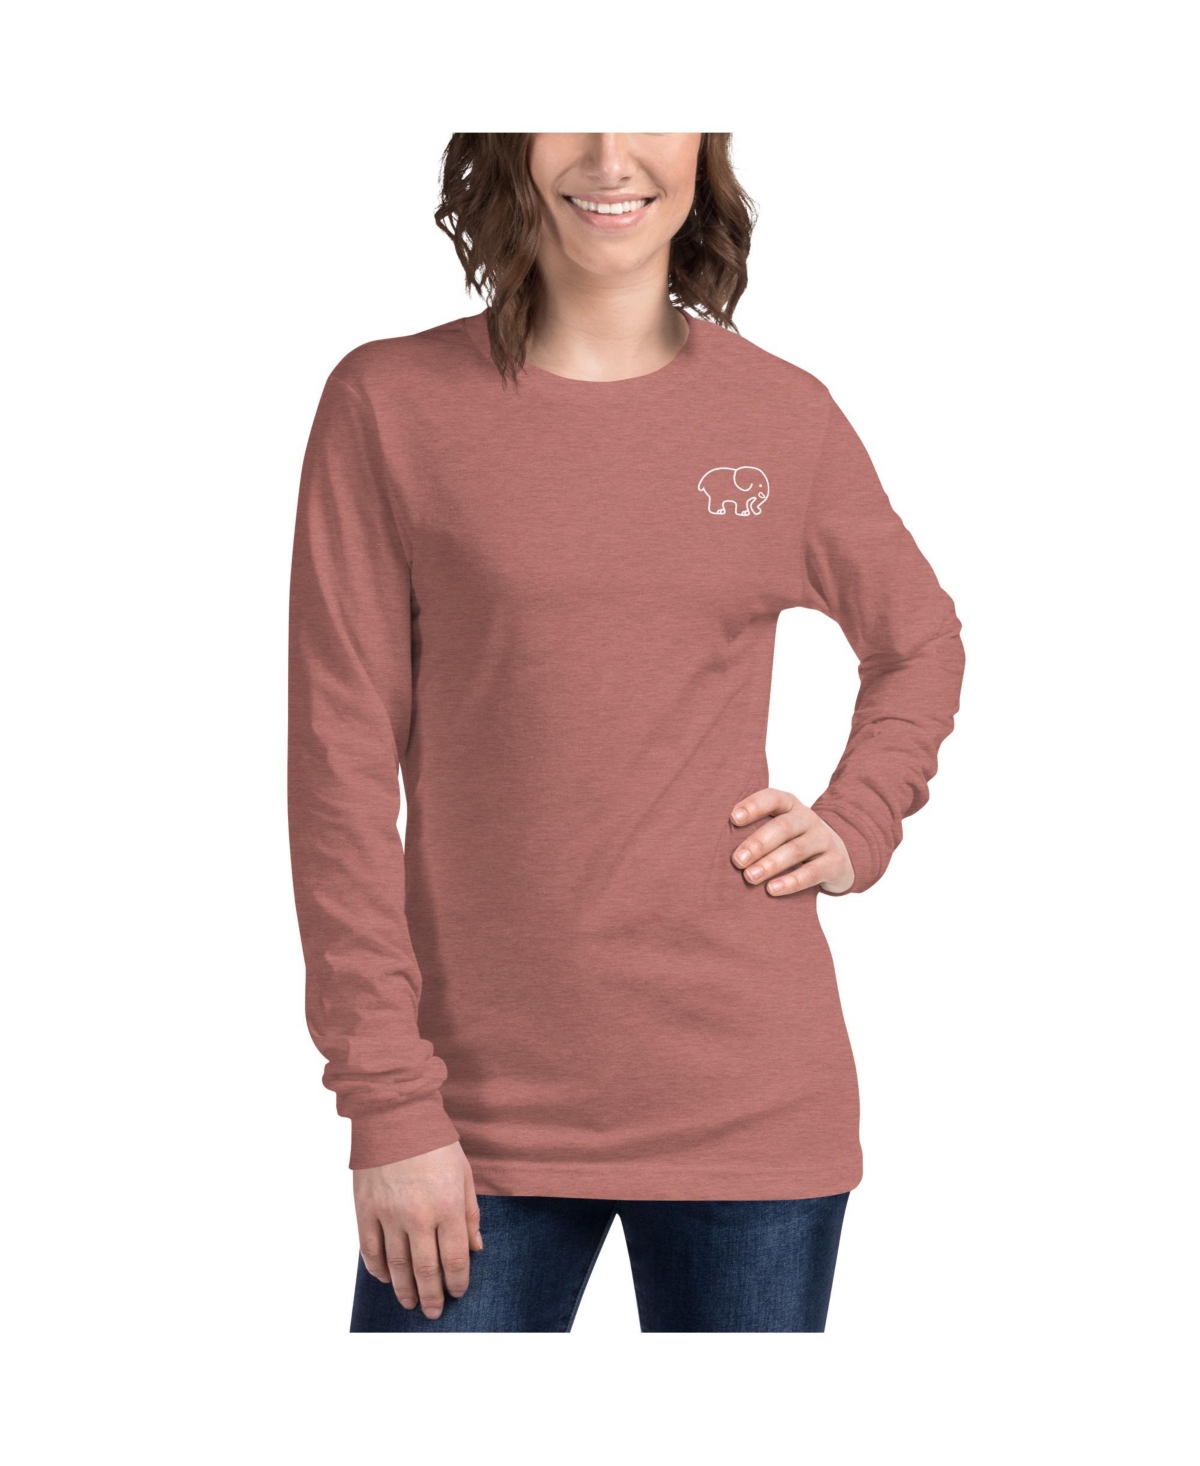 Radiant Paisley Woman's Long Sleeve T-Shirt - Brown